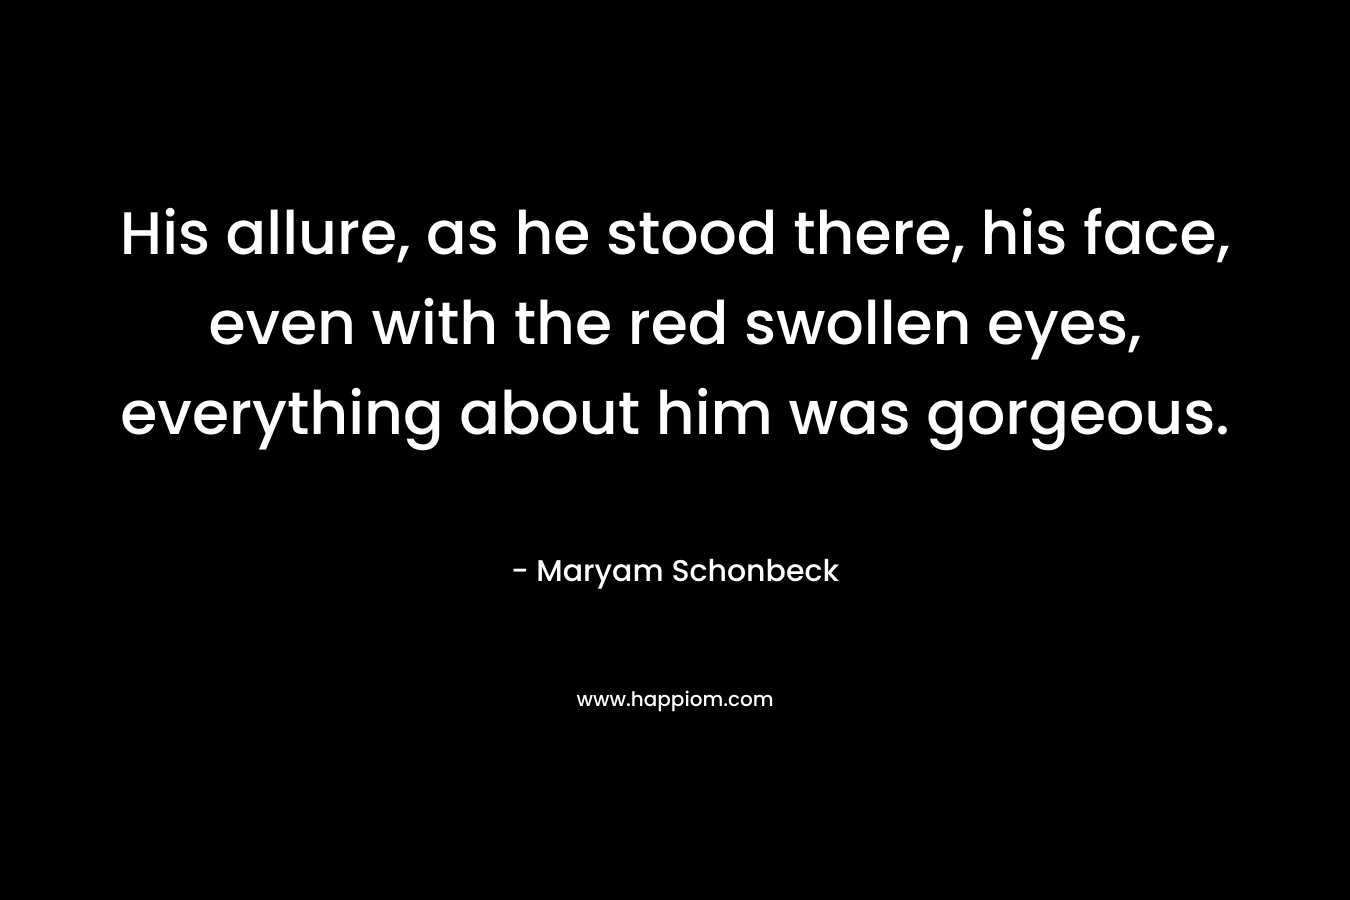 His allure, as he stood there, his face, even with the red swollen eyes, everything about him was gorgeous. – Maryam Schonbeck